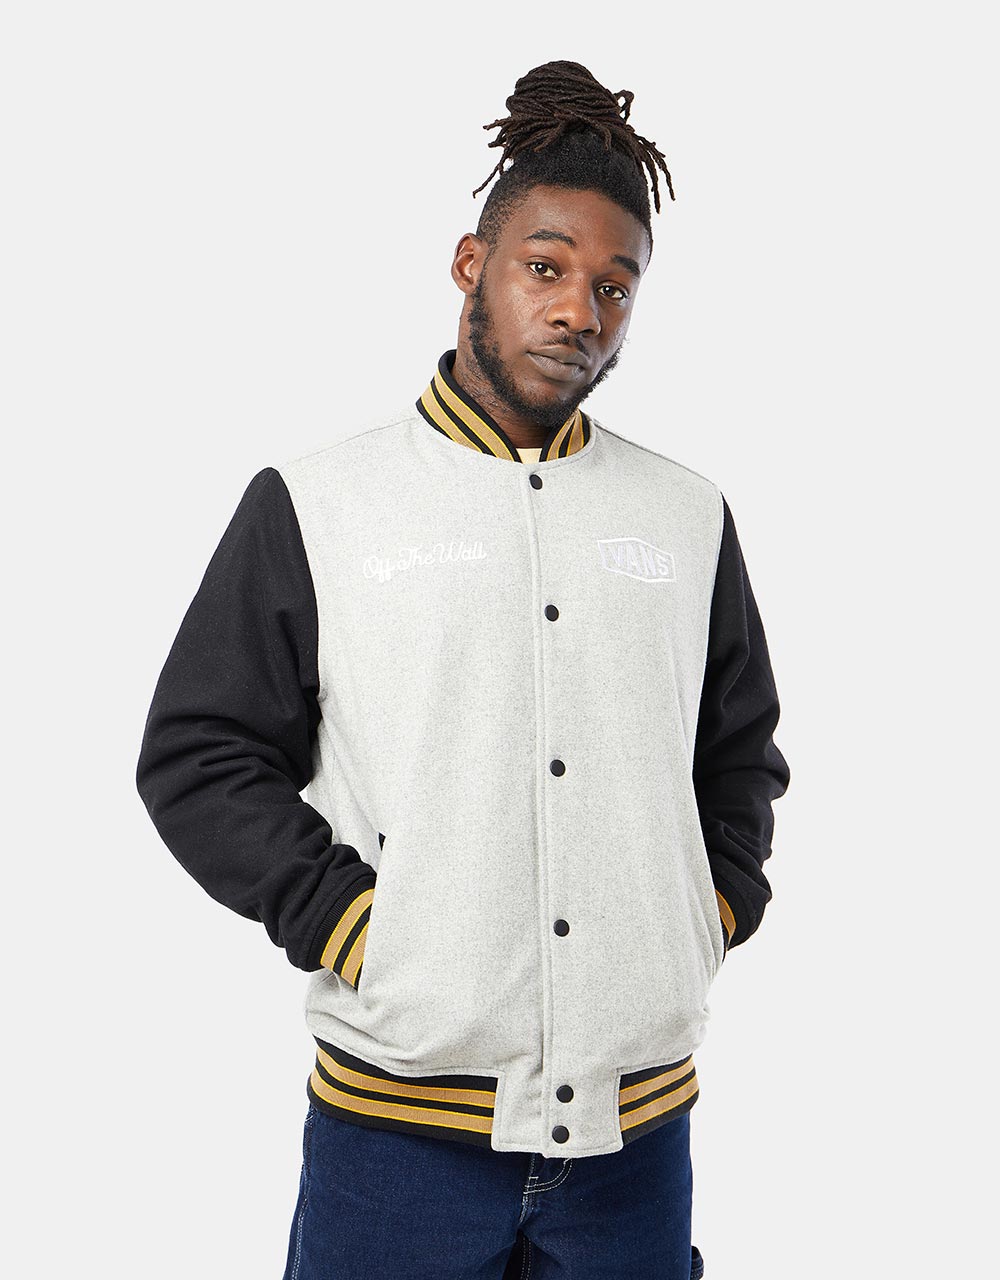 Vans Checkerboard Research Varsity Jacket - Charcoal Heather